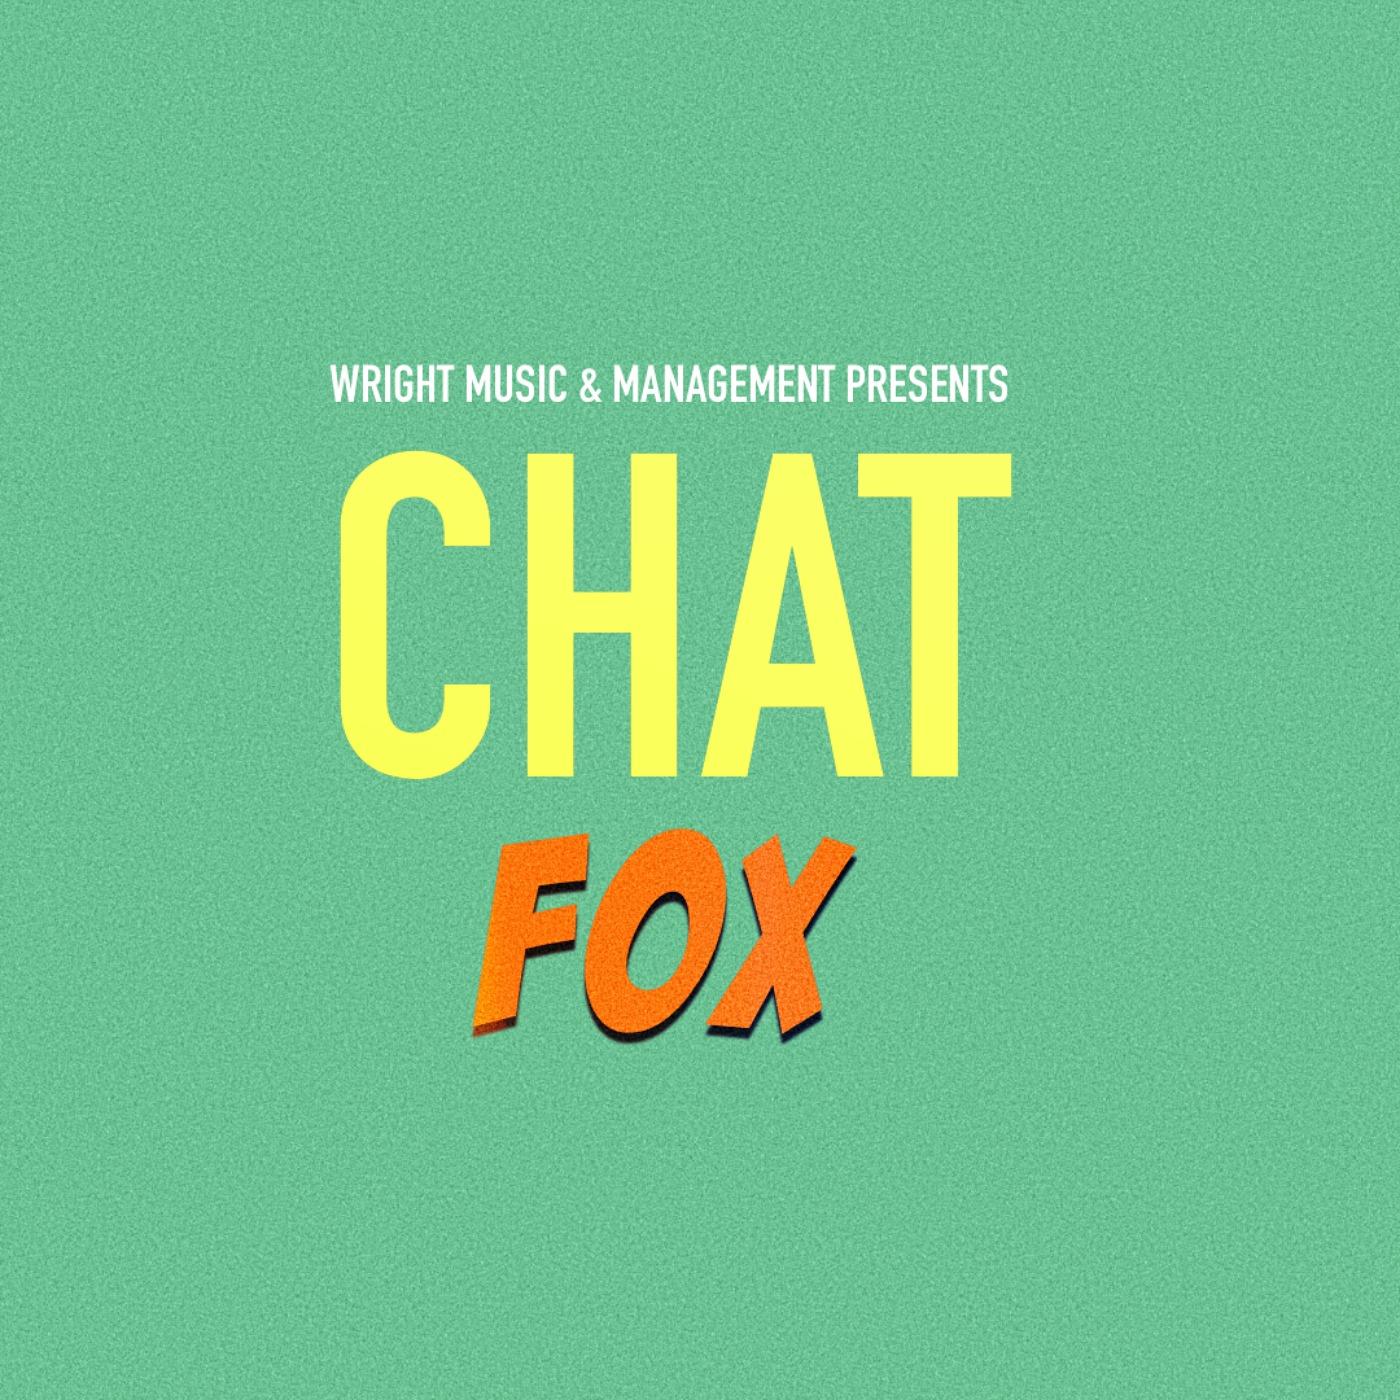 Wright Music & Management presents Chat Fox